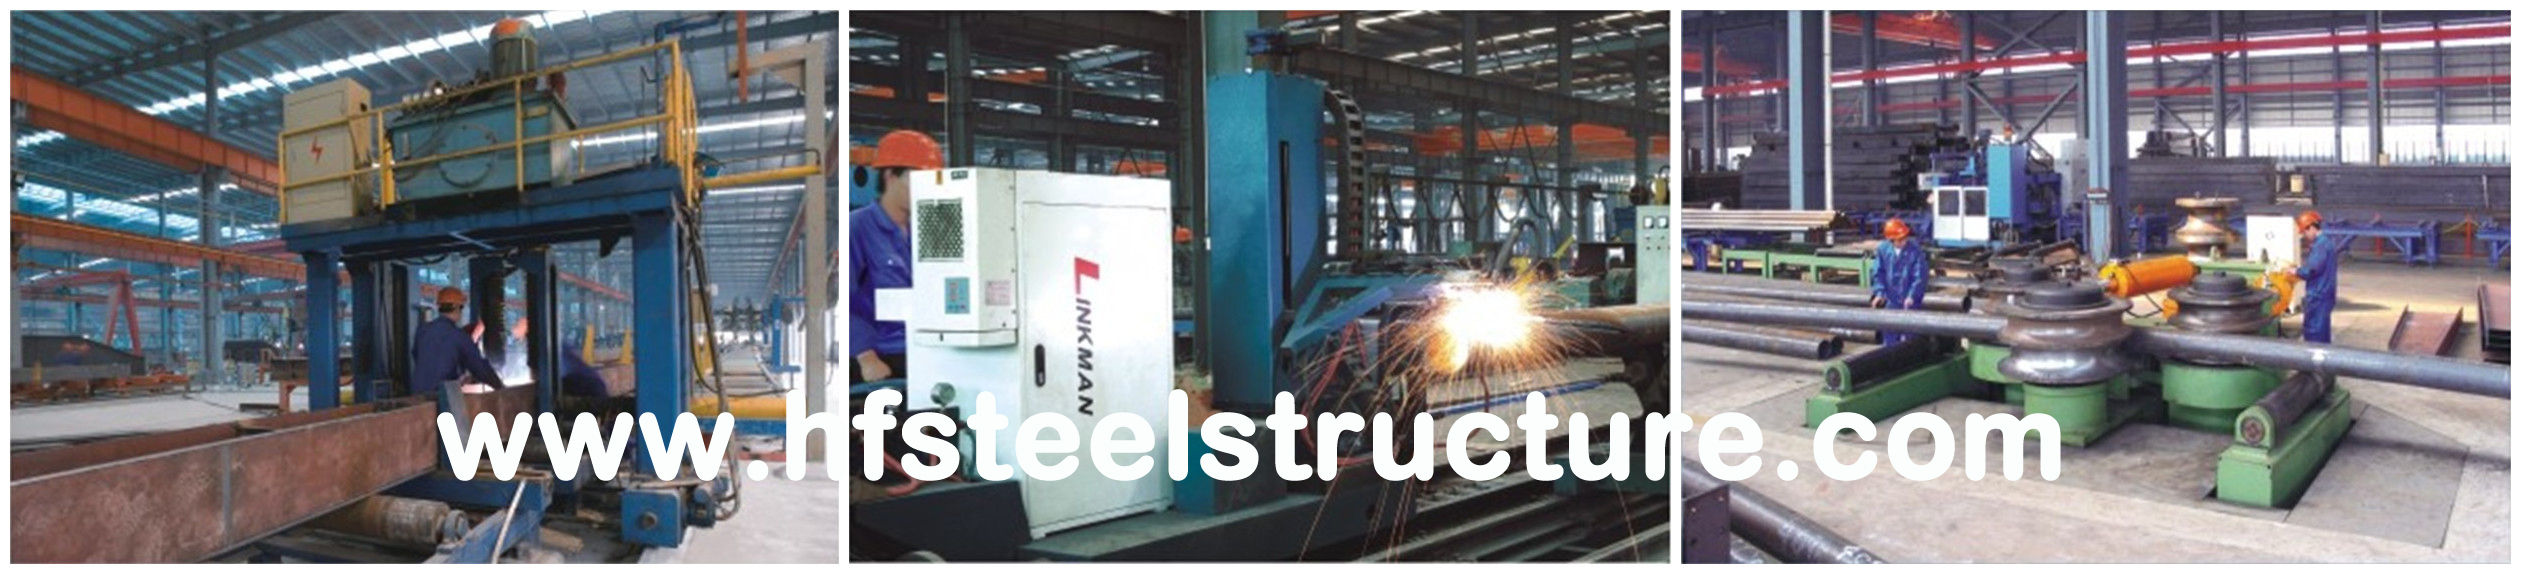 H-section Industrial Steel Building Fabrication For Steel Column / Beam